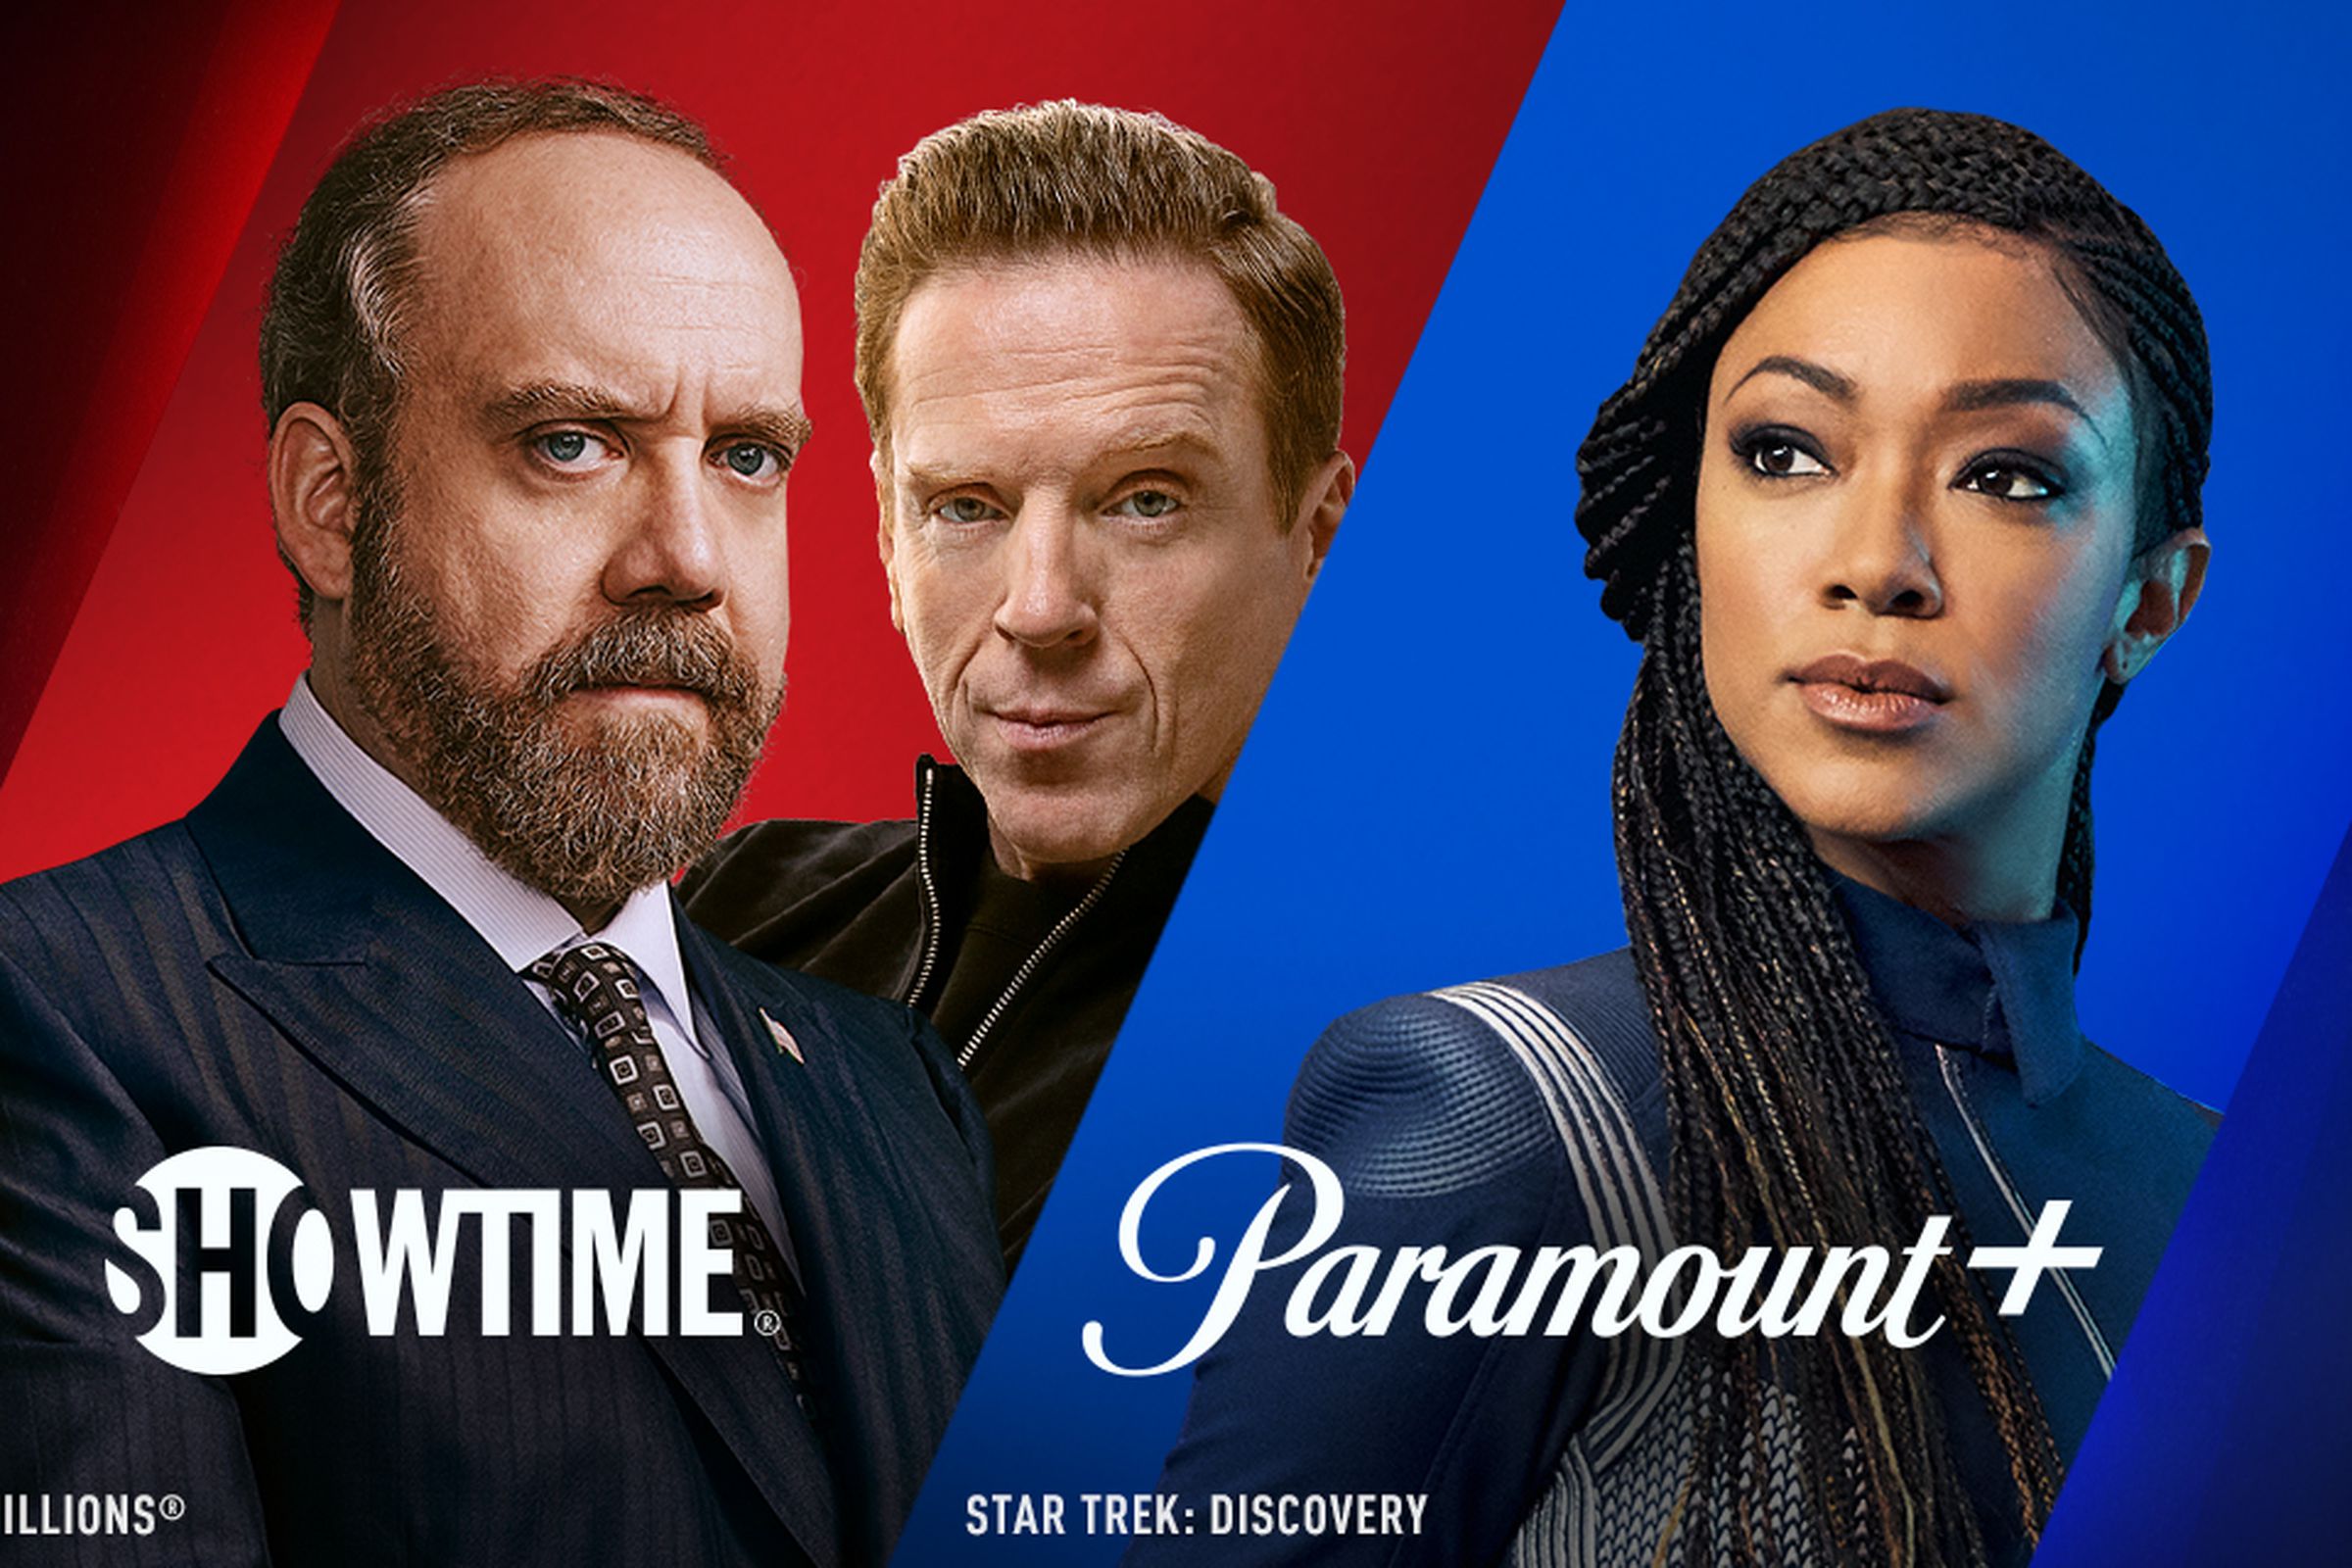 An image of two men from the Showtime show Billionaires with the Showtime logo beneath them on one side of the image. On the other side of the image is a character from Star Trek: Discovery with the Paramount Plus logo beneath her.